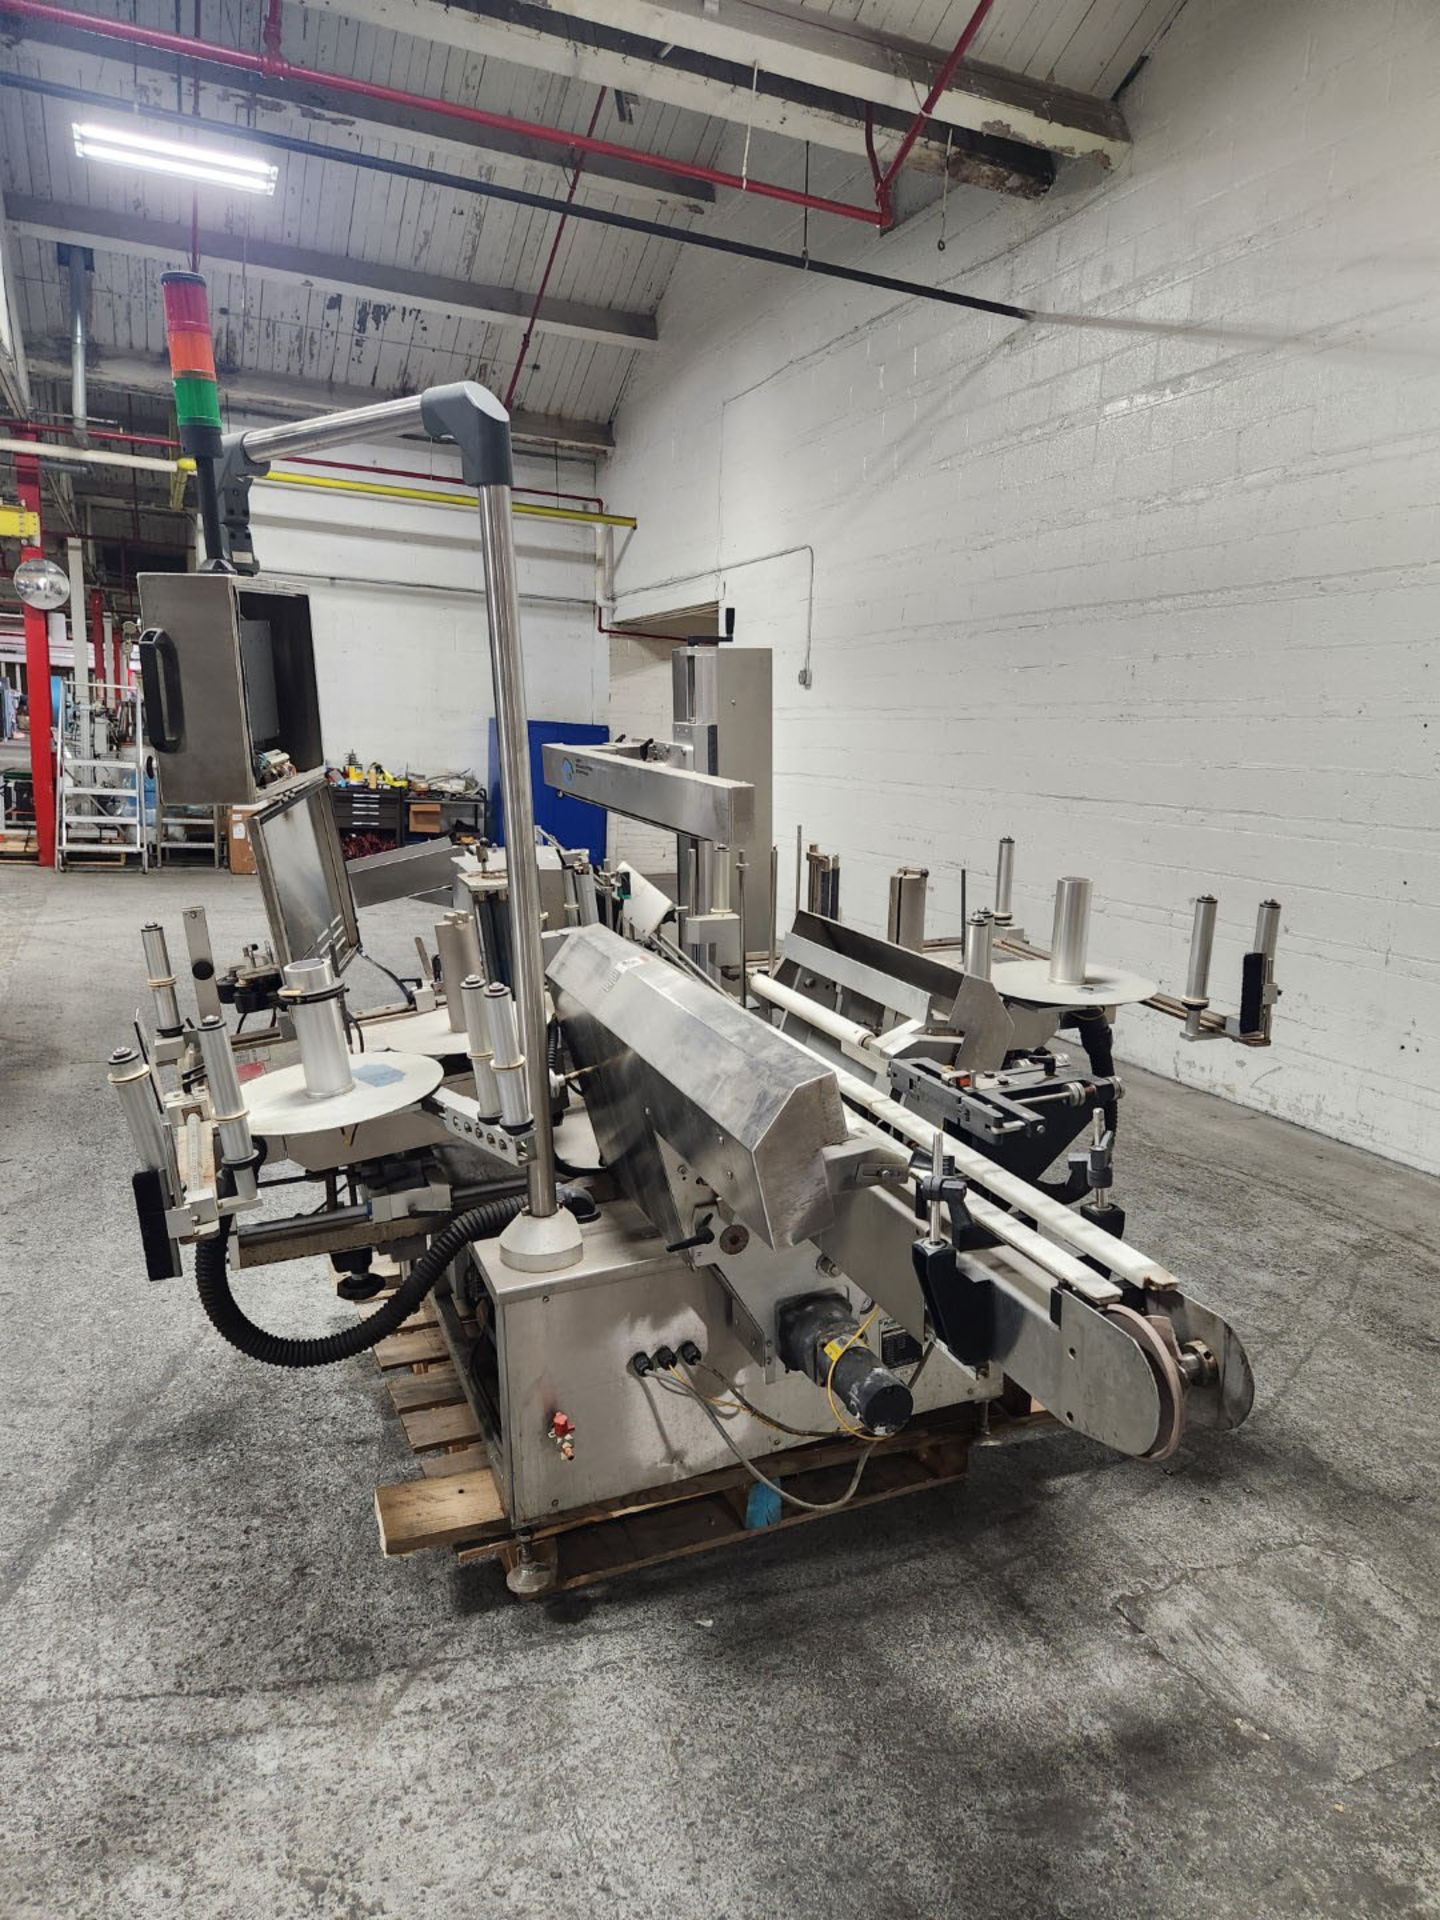 NJM-CLI wrap-around labeler, model 326VLRDBP, stainless steel construction, with label printer, - Image 4 of 16